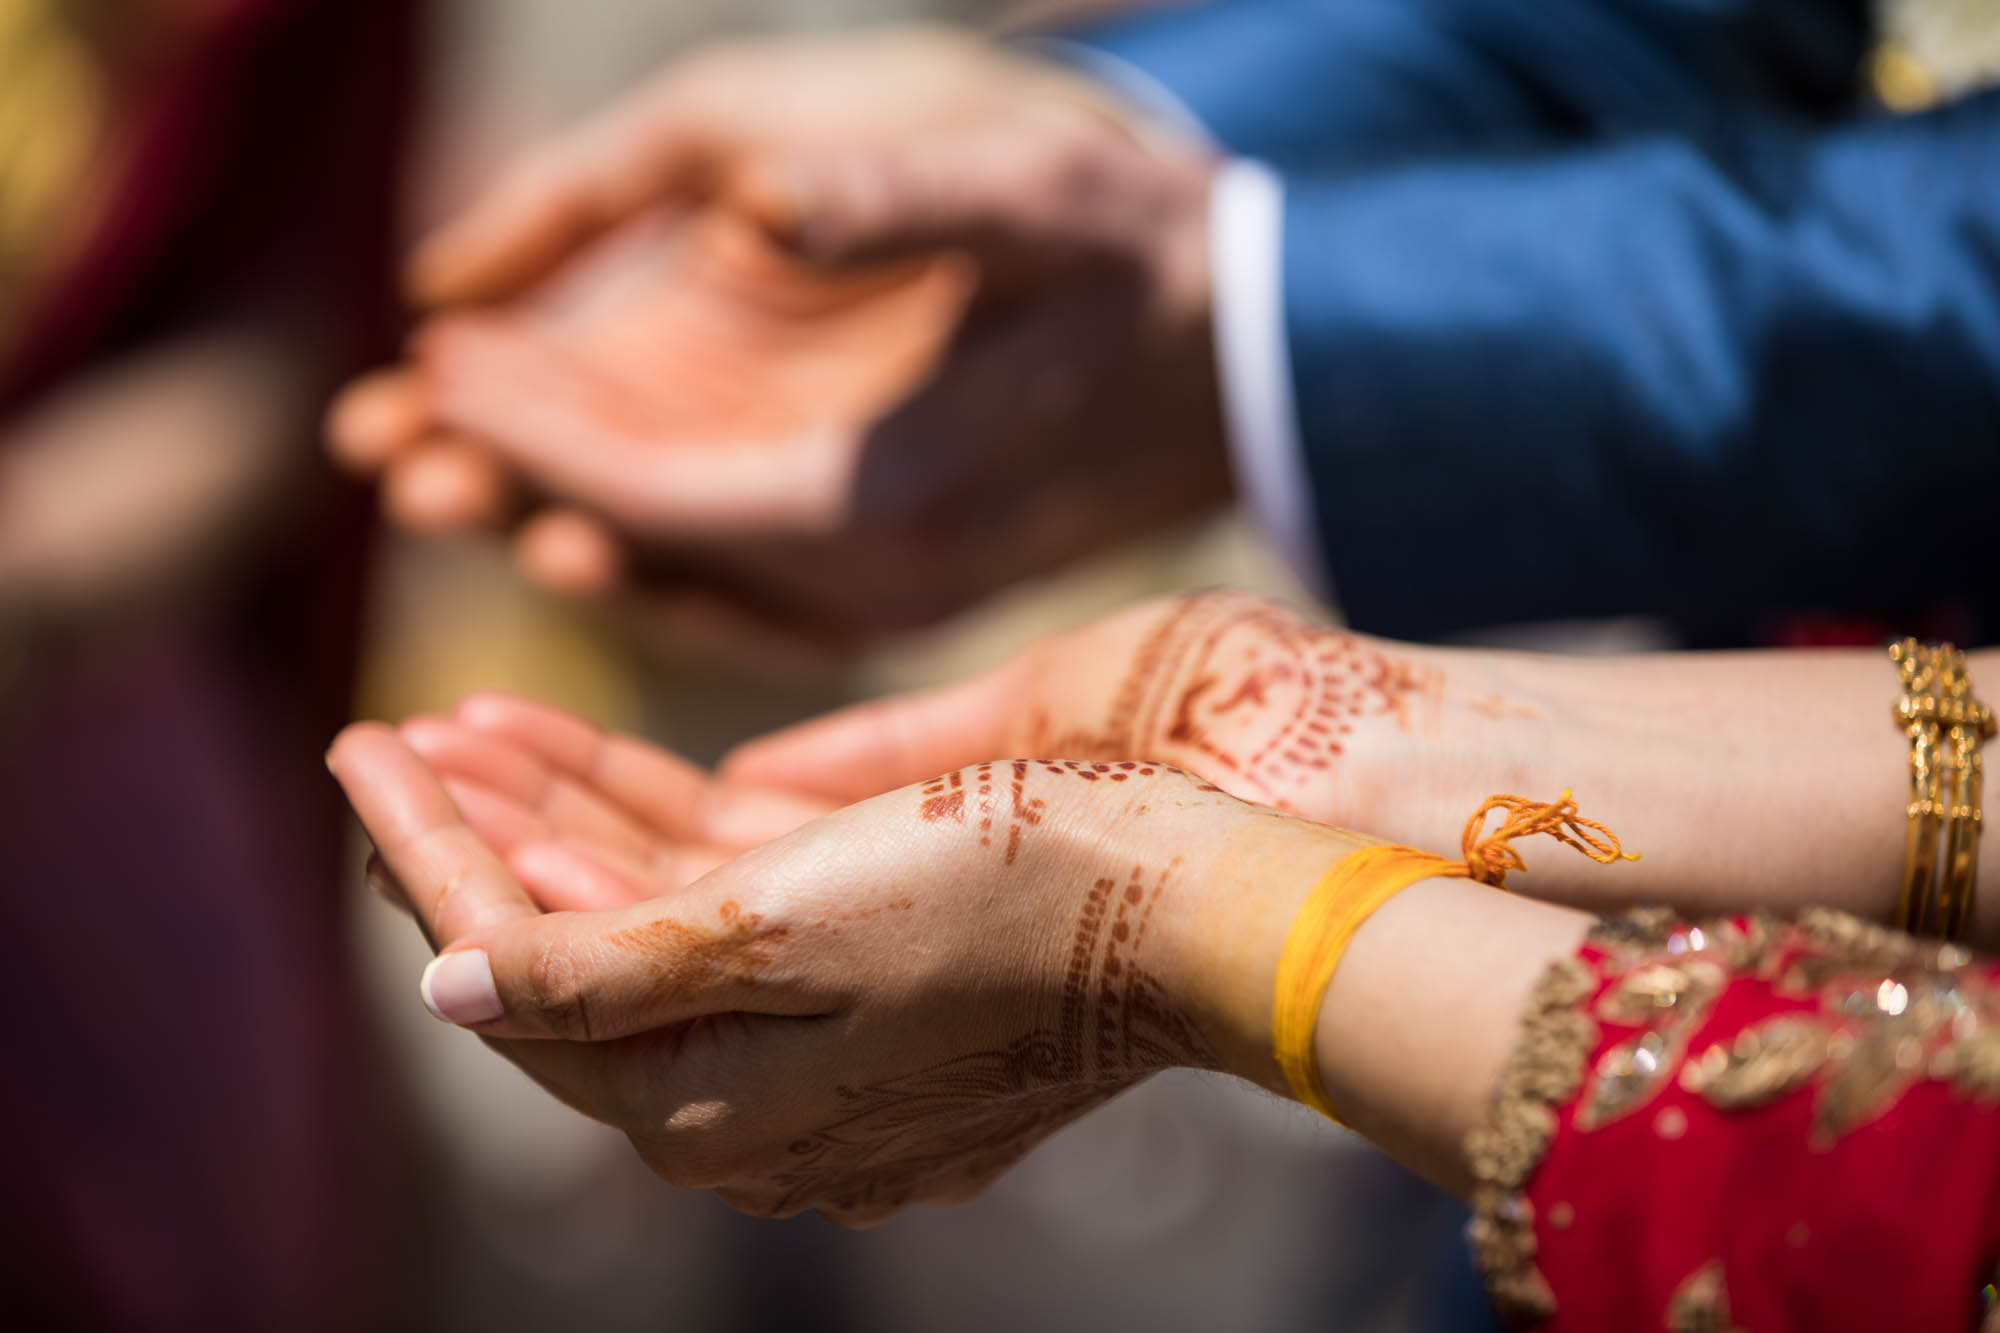 Hindu Temple Society of North America wedding photos of woman's hands painted in henna with man's hands behind her